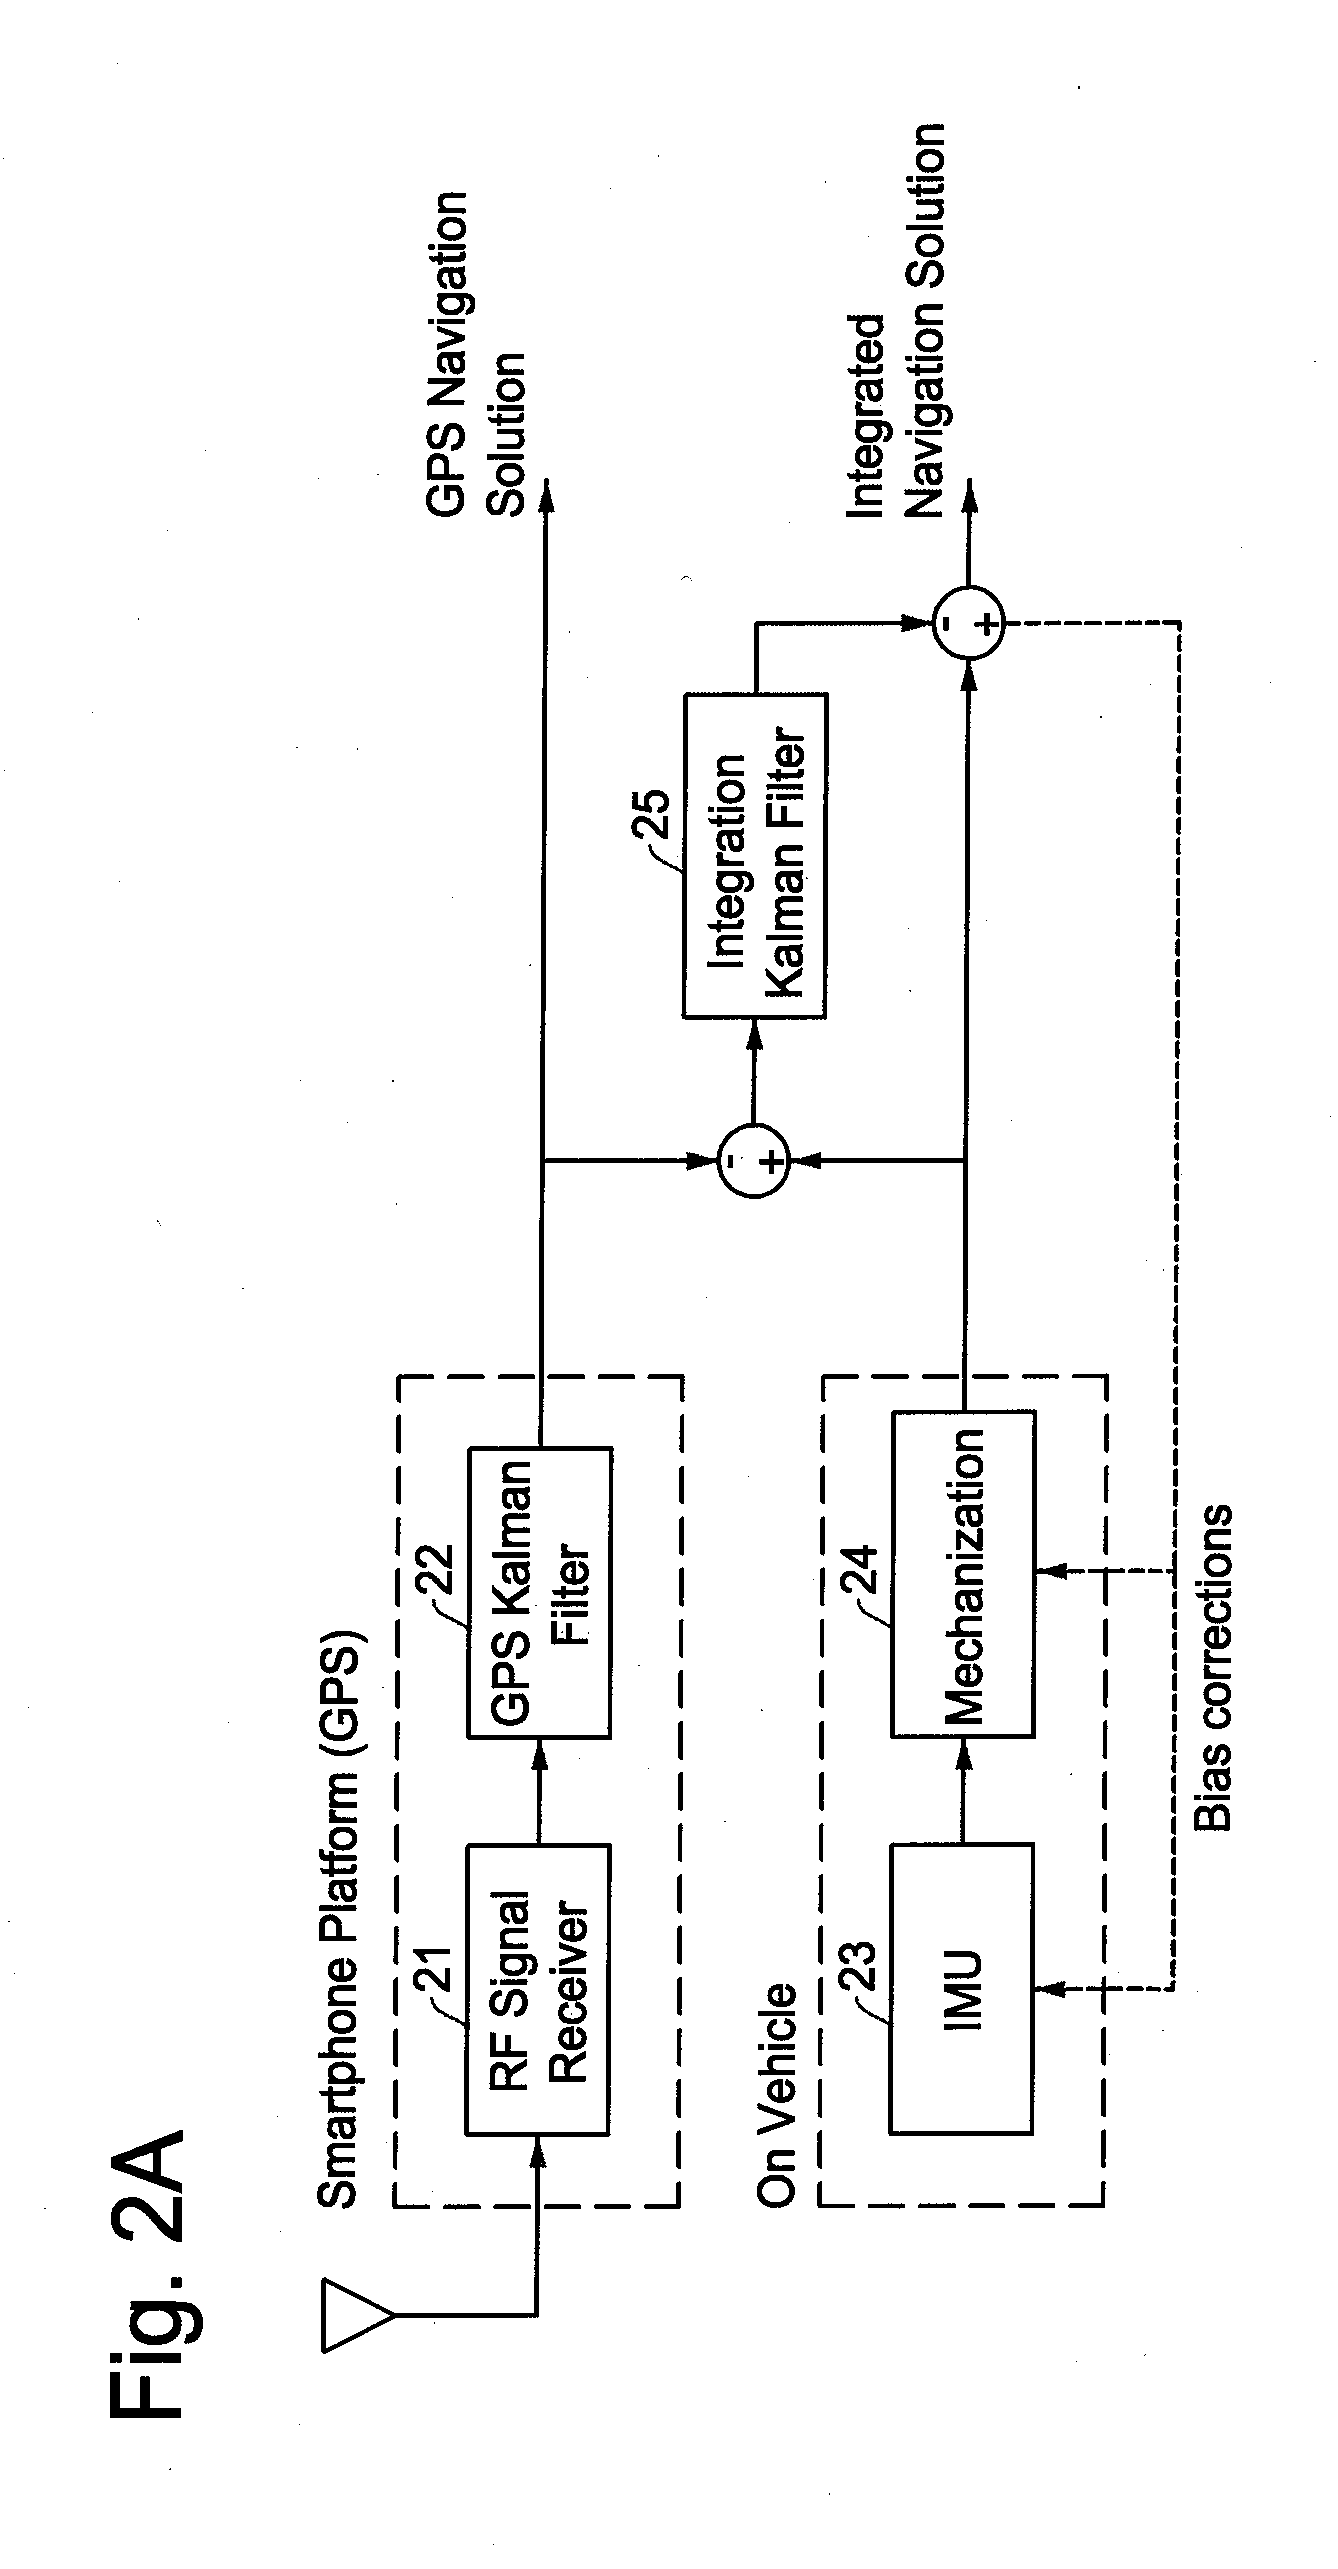 Vehicle positioning by map matching as feedback for ins/GPS navigation system during GPS signal loss